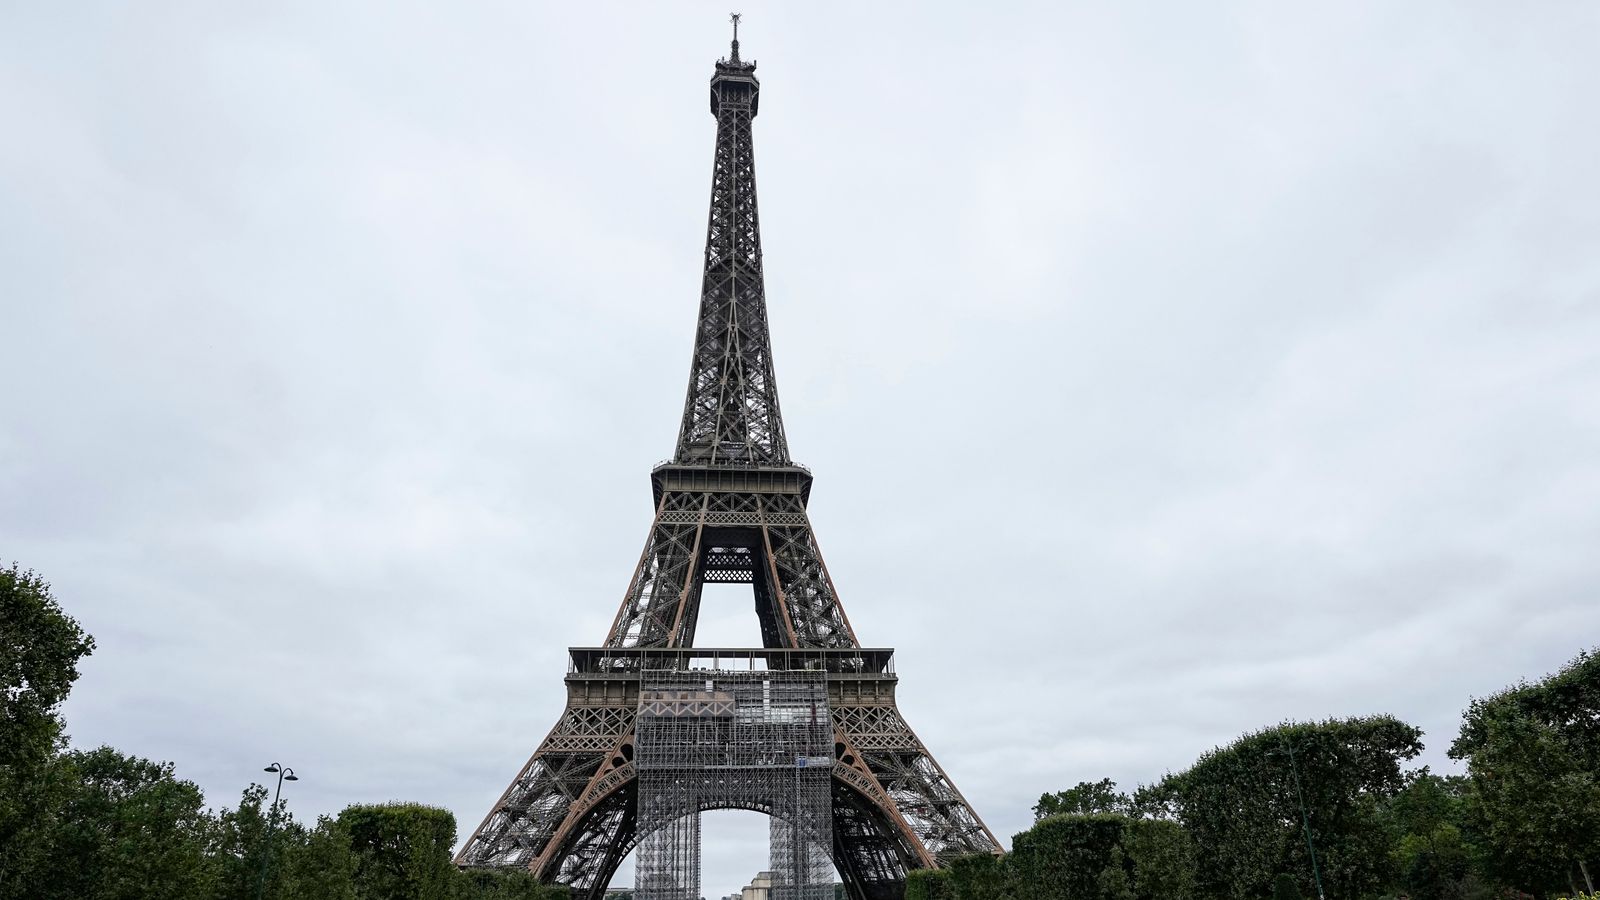 French man charged after reported rape of British policewoman near Eiffel Tower in Paris